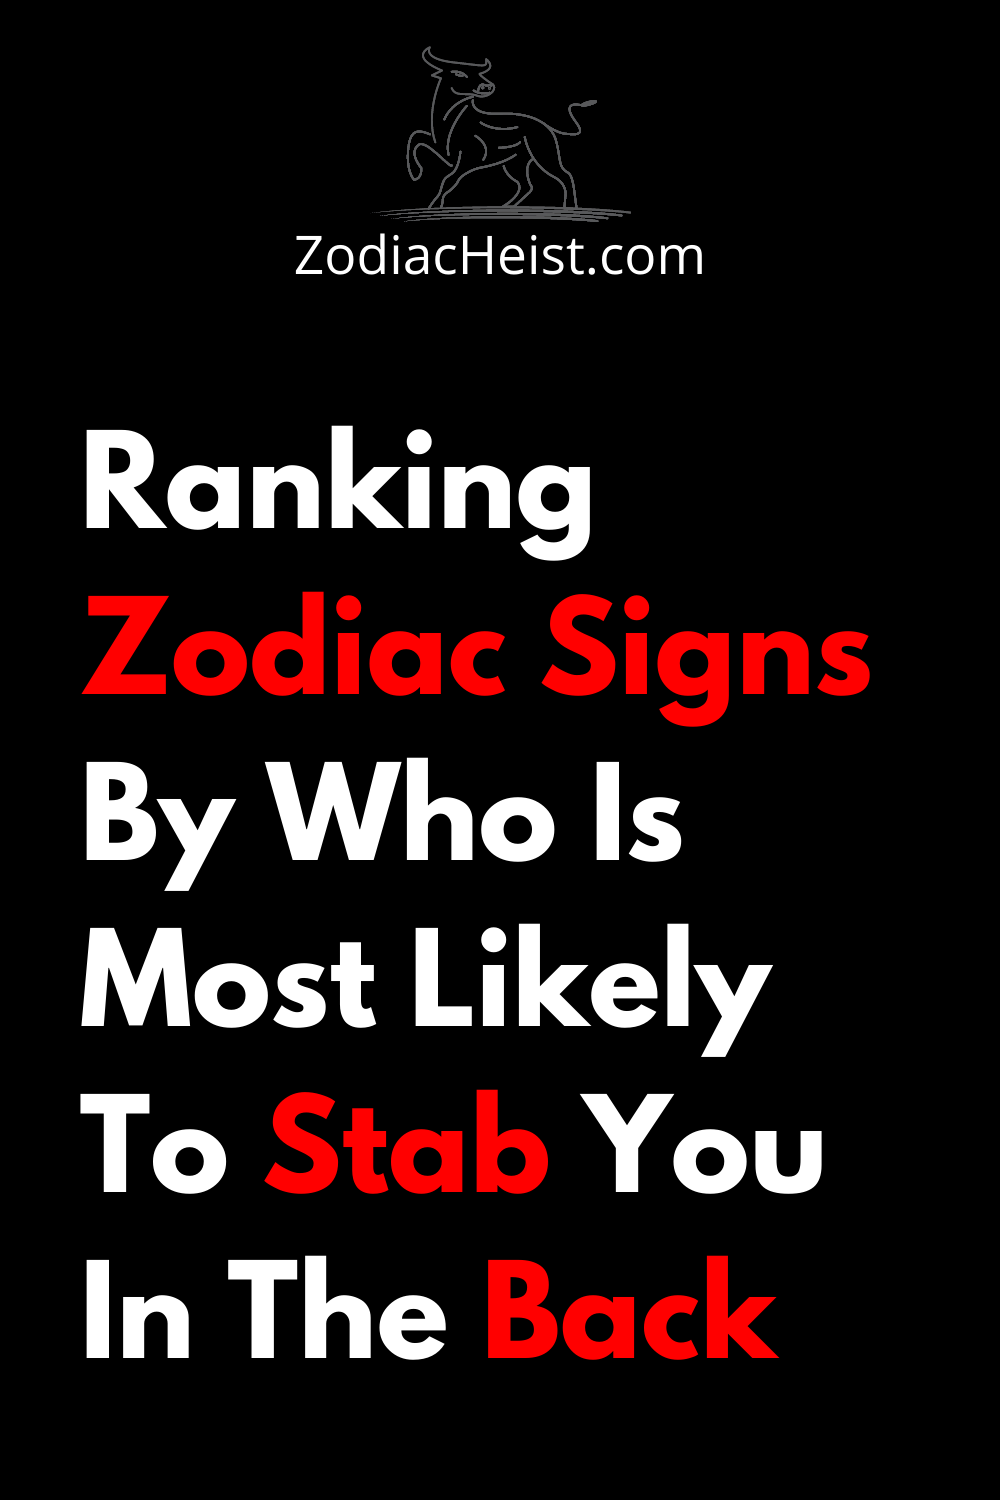 Ranking Astrological Signs By Who Is Most Likely To Stab You In The Back